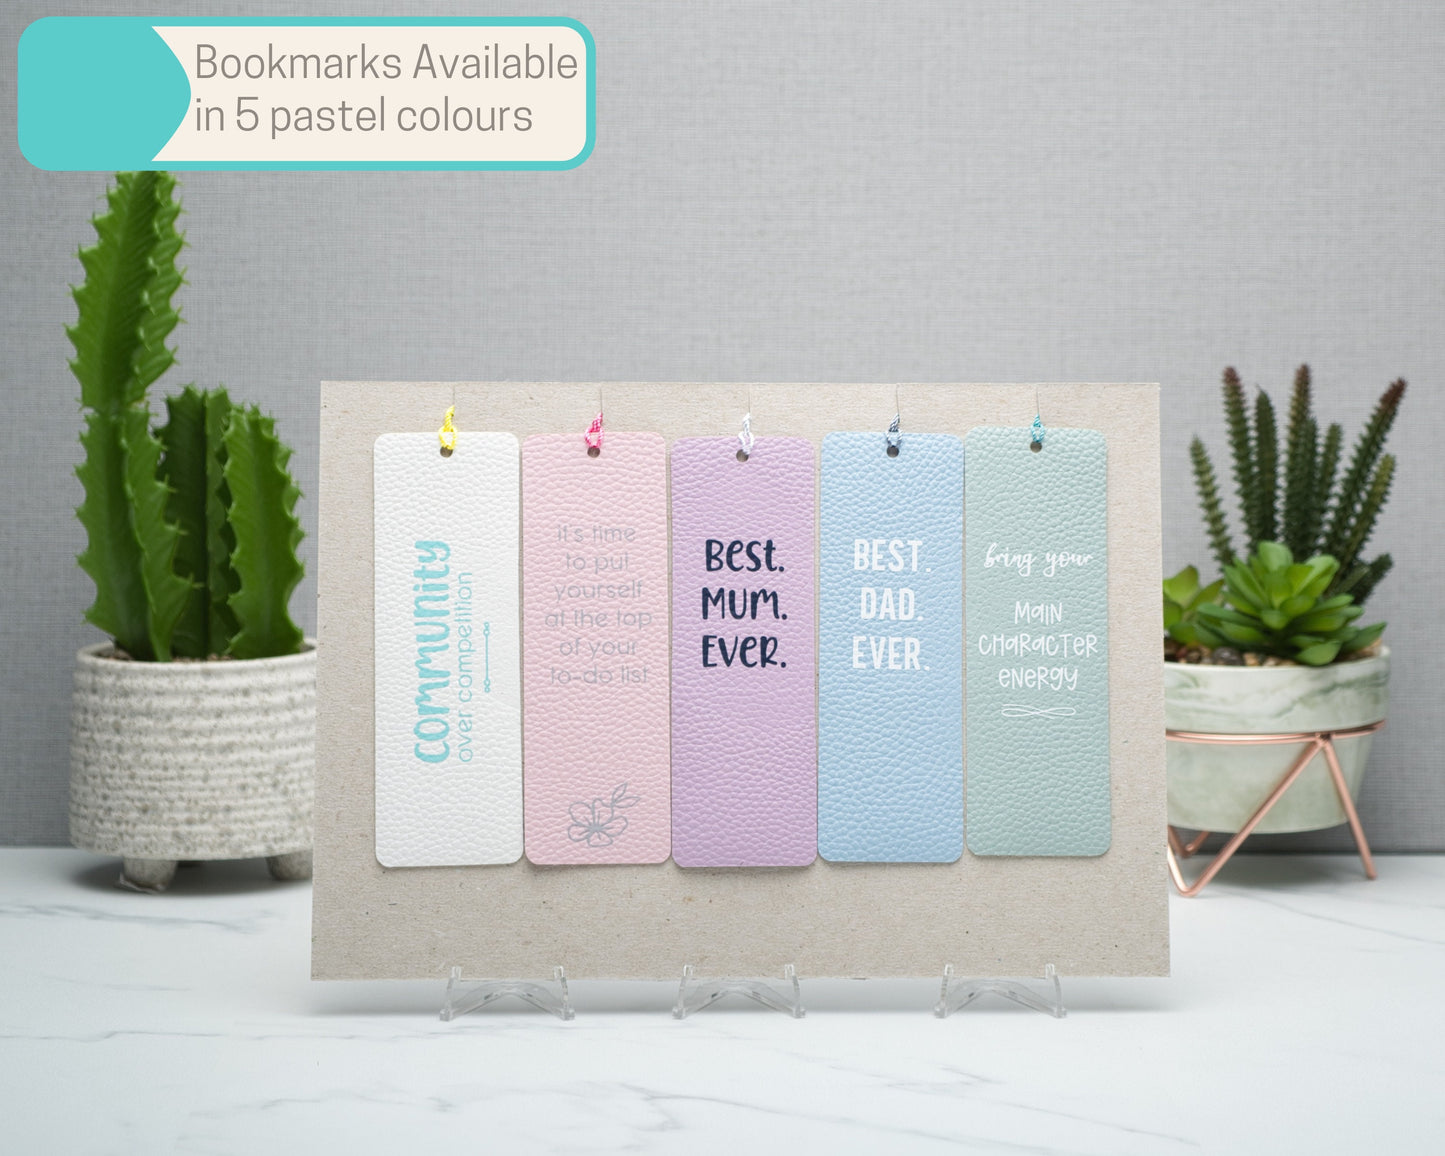 Custom Bring Your Main Character Energy Faux Leather Bookmark, Handmade Pastel Gift for Book Lovers, Self Care Inspirational Quotes